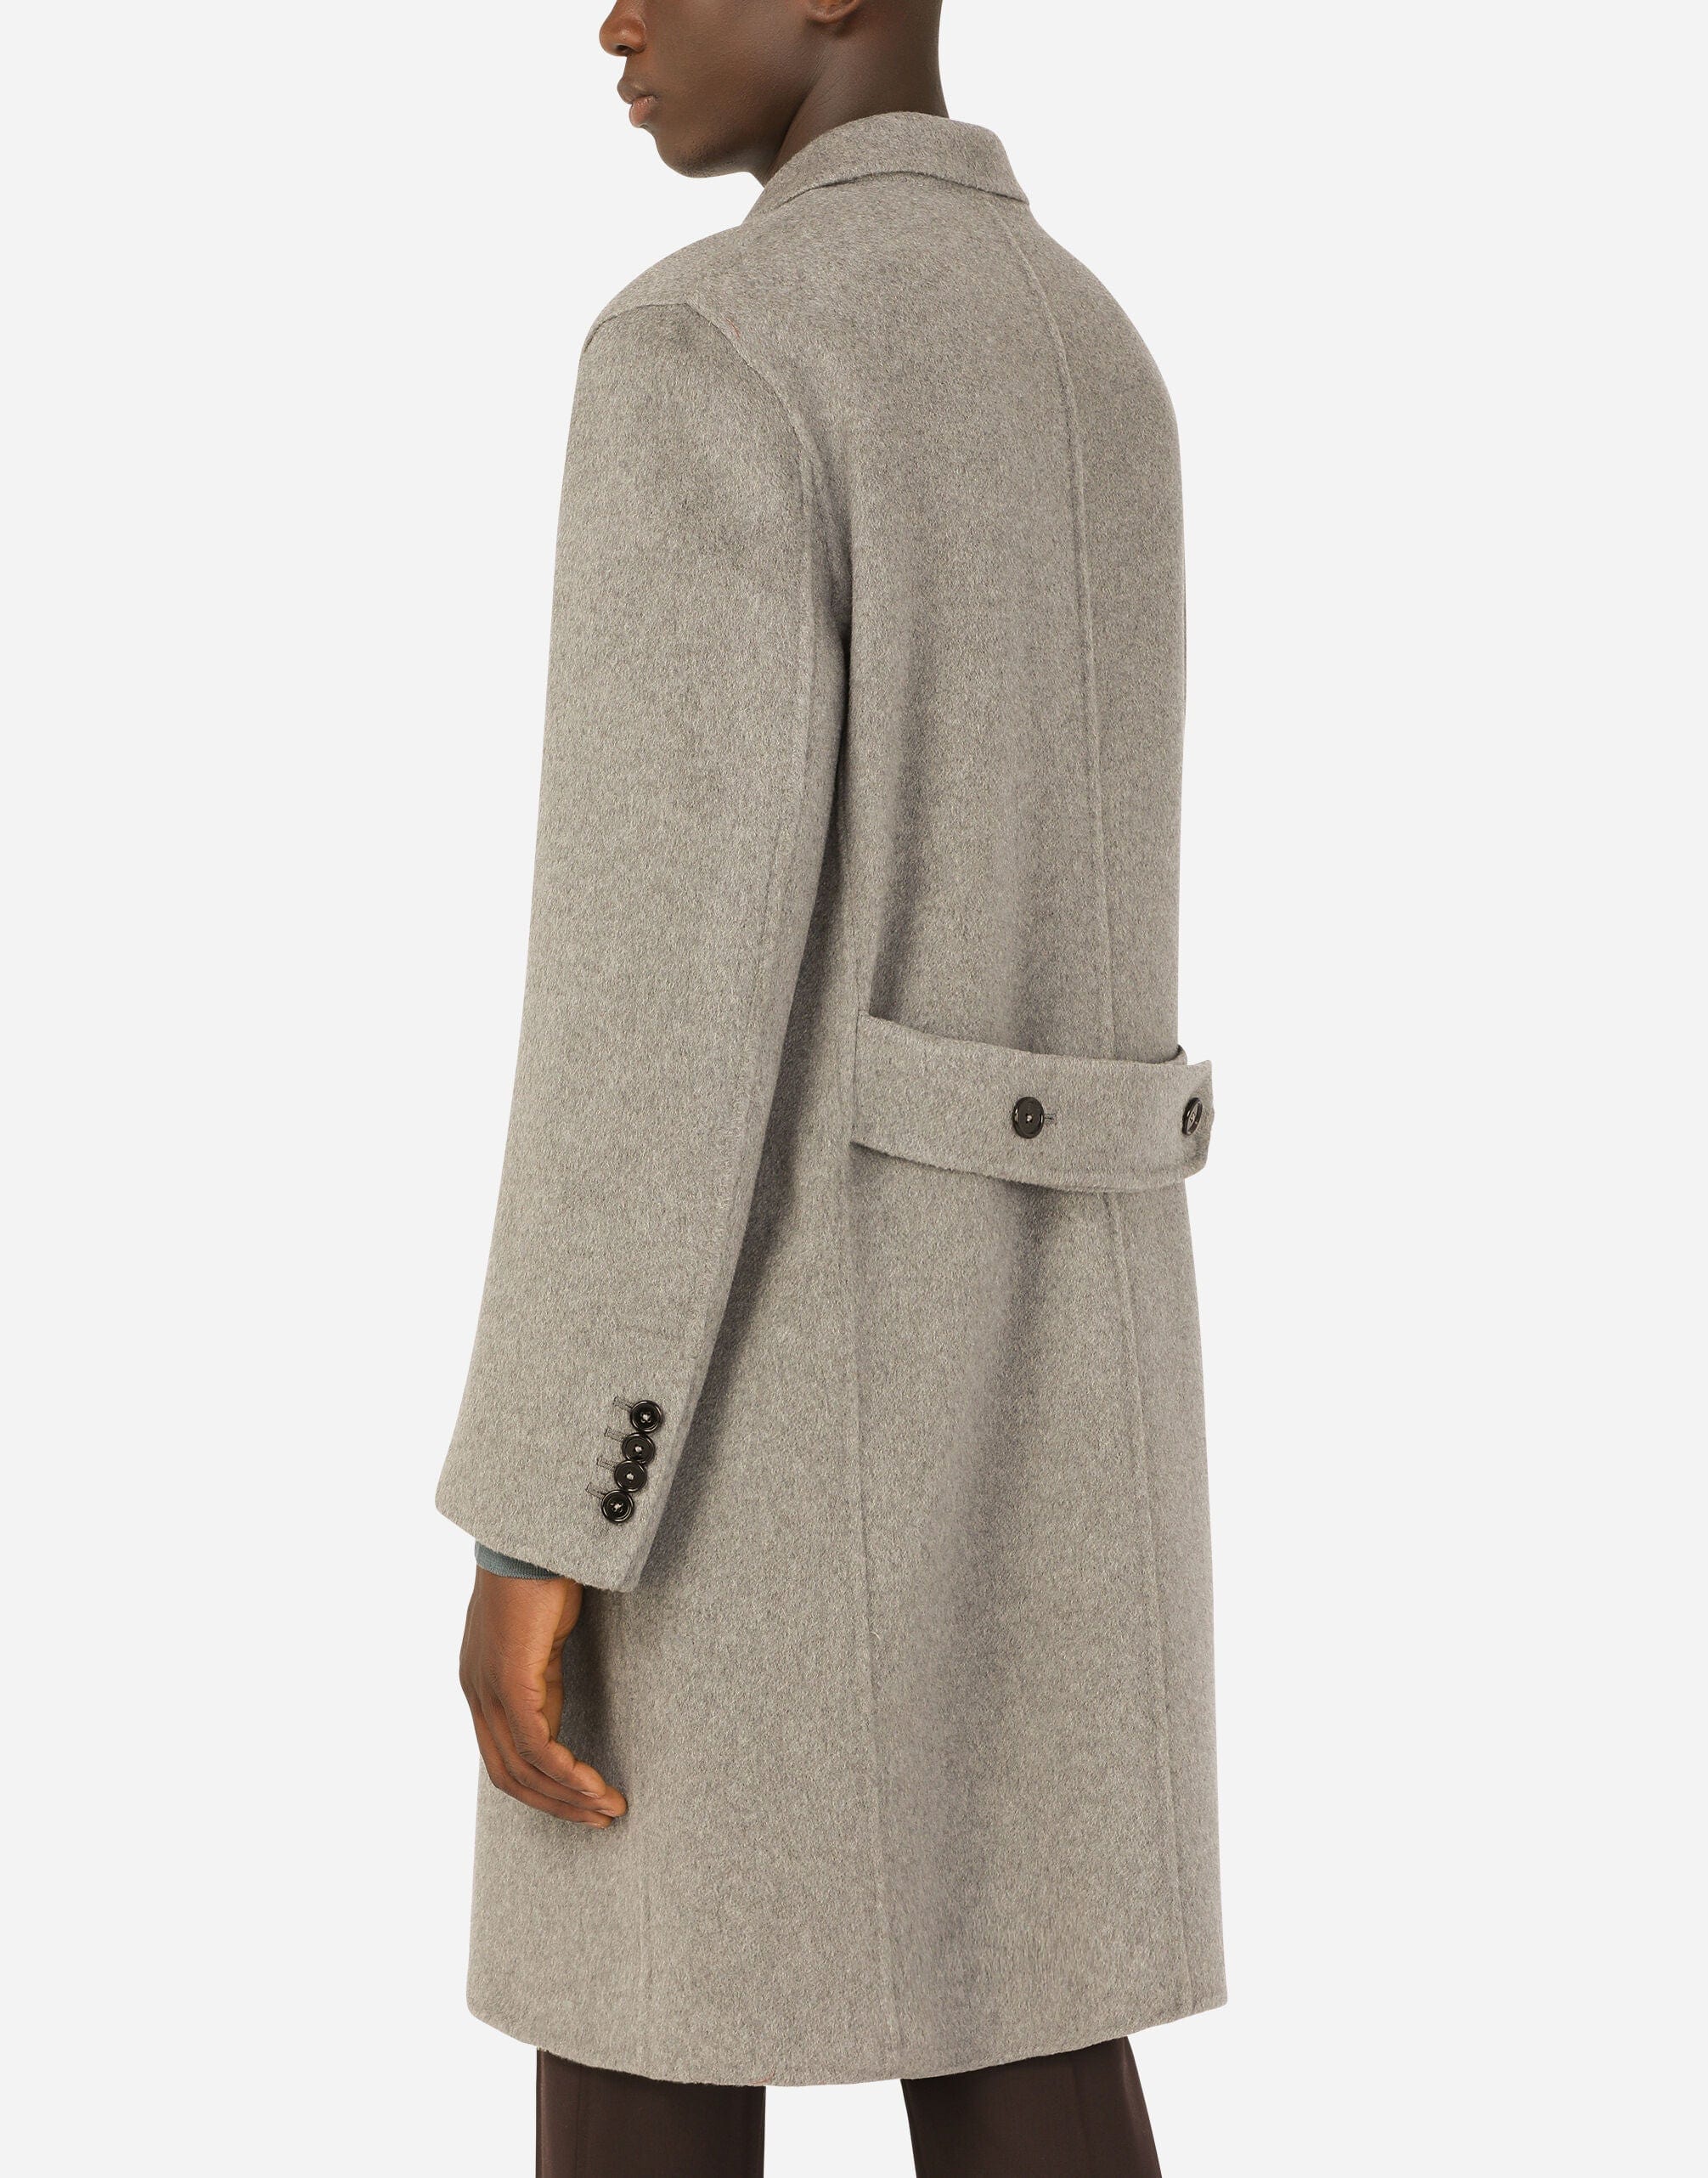 Dolce & Gabbana Double-Breasted Double Cashmere Coat